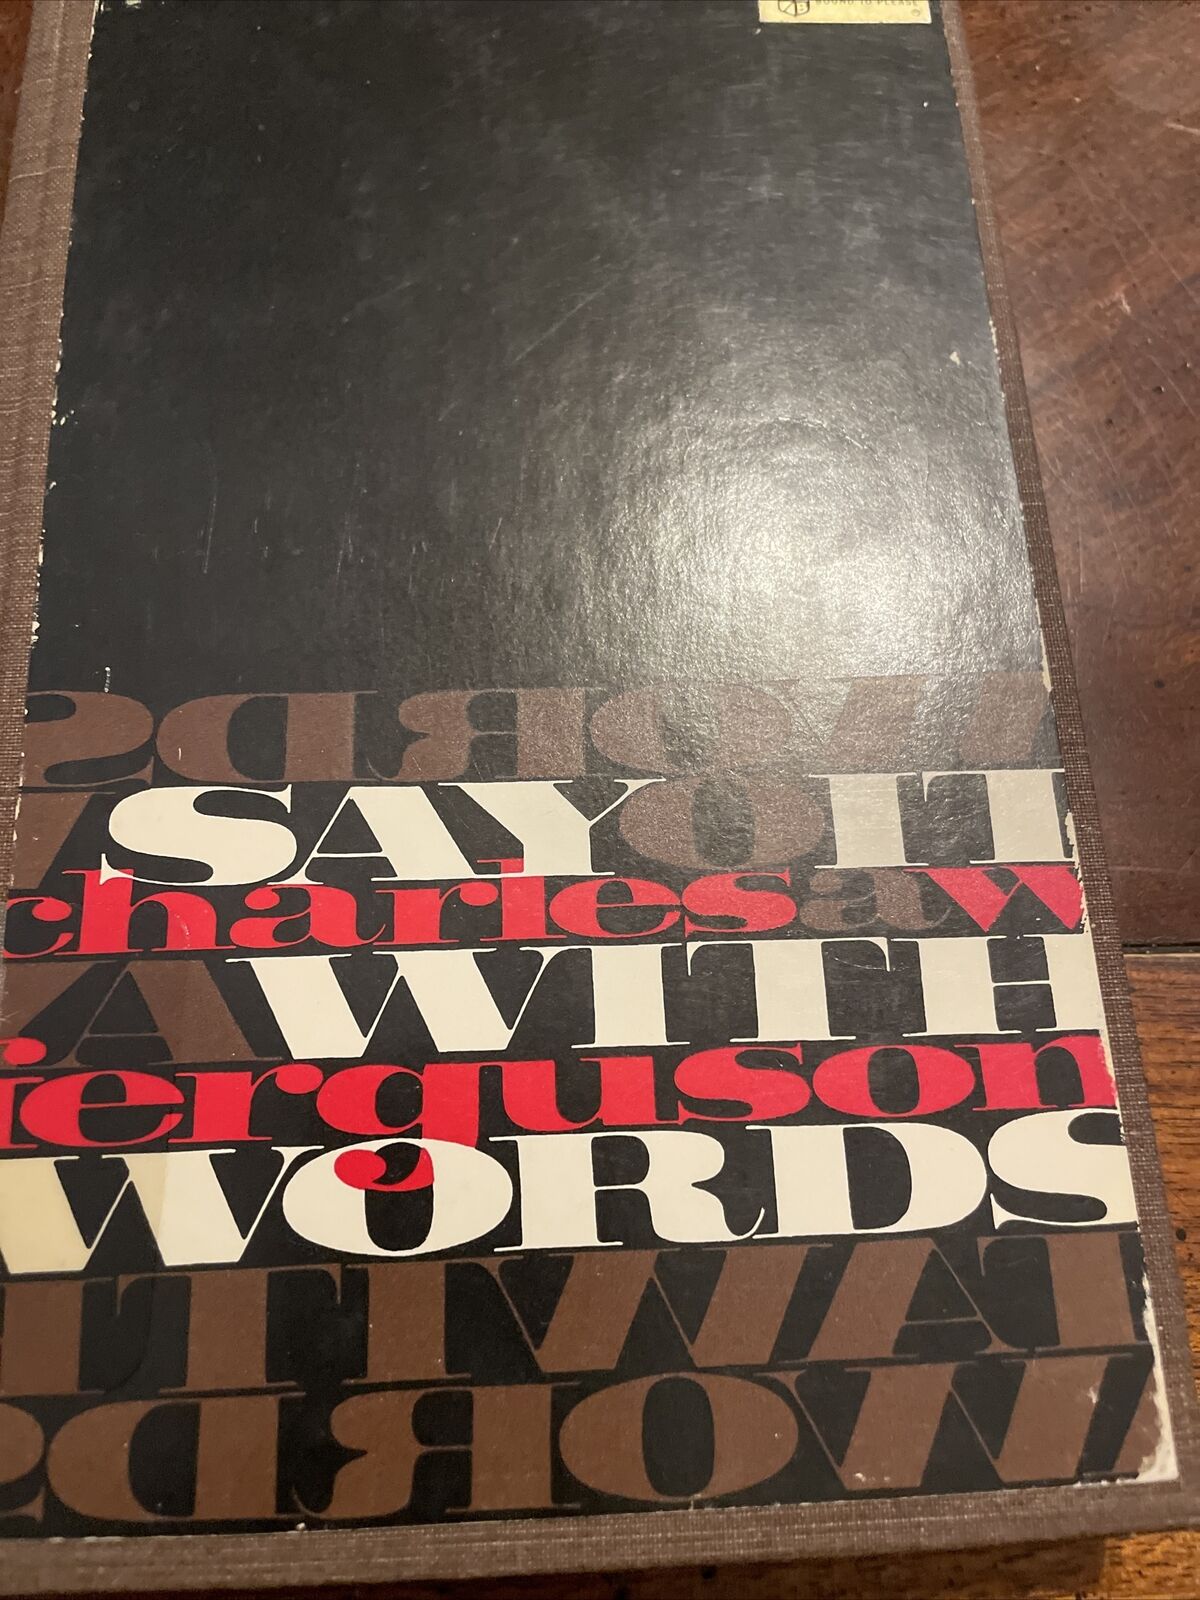 SAY IT WITH WORDS By Charles W. Ferguson 1969 Printing